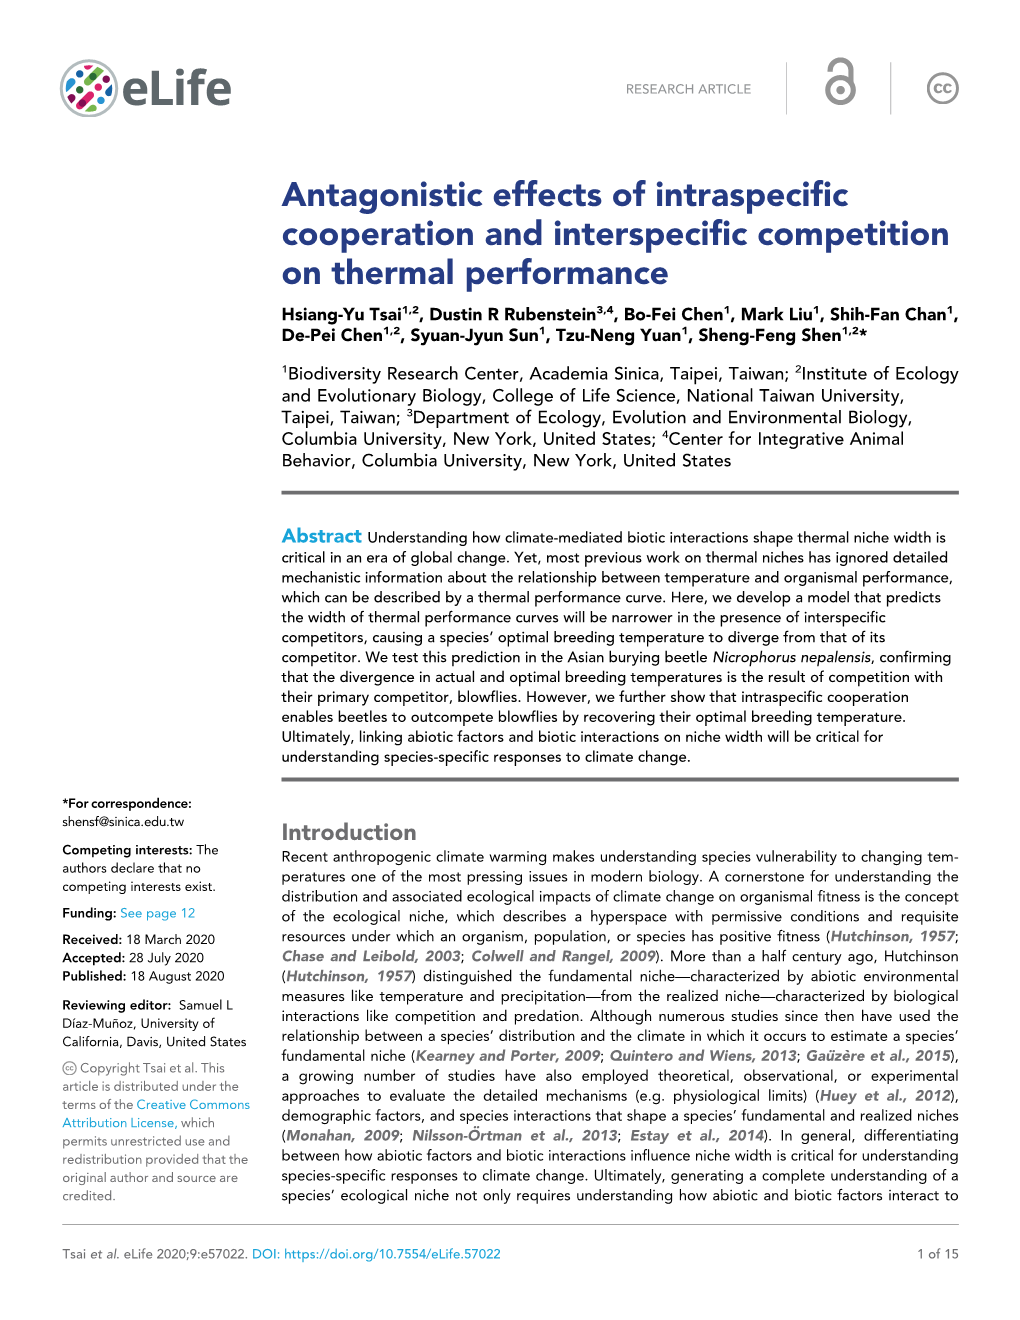 Antagonistic Effects of Intraspecific Cooperation and Interspecific